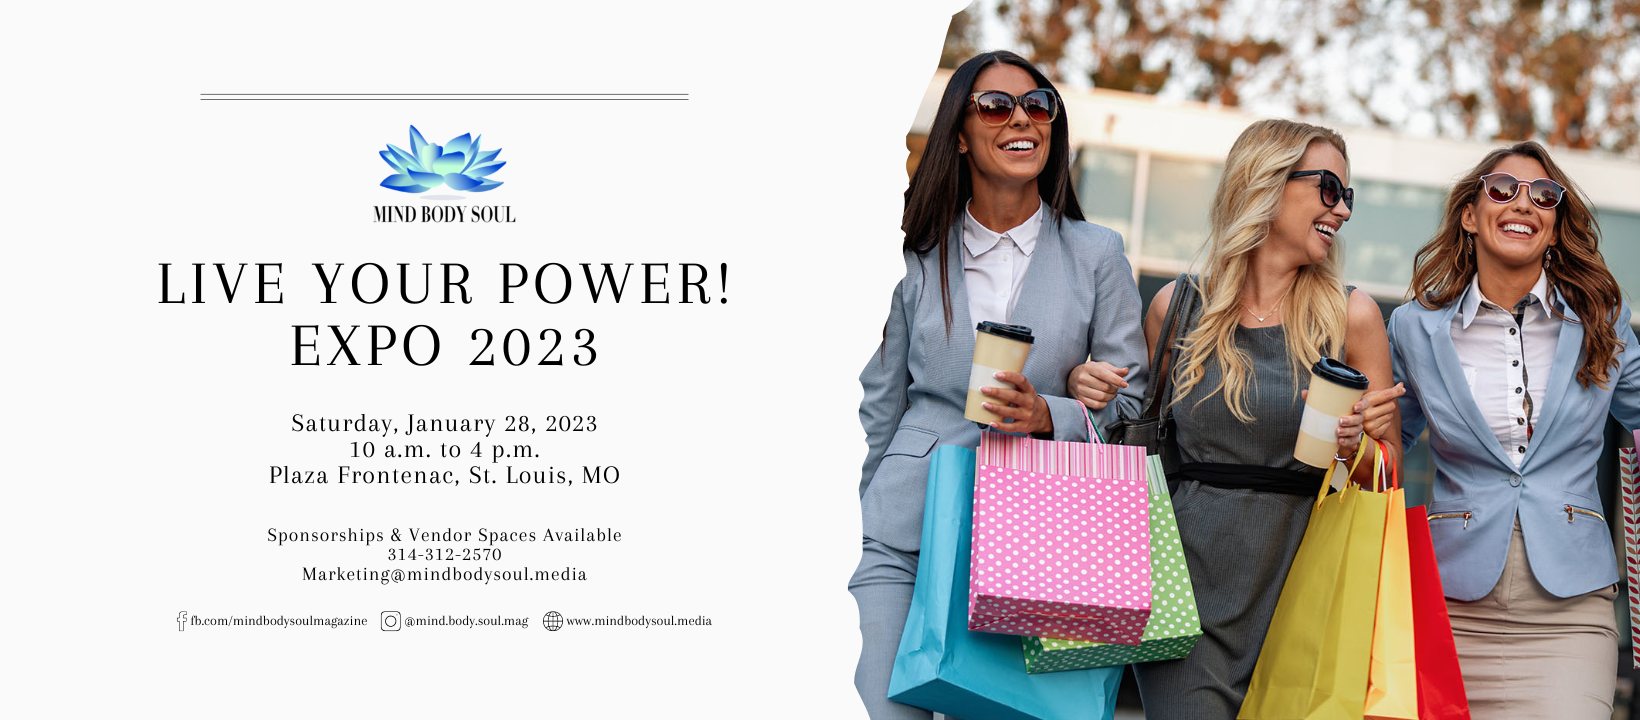 St. Louis Live Your Power! Expo 2023